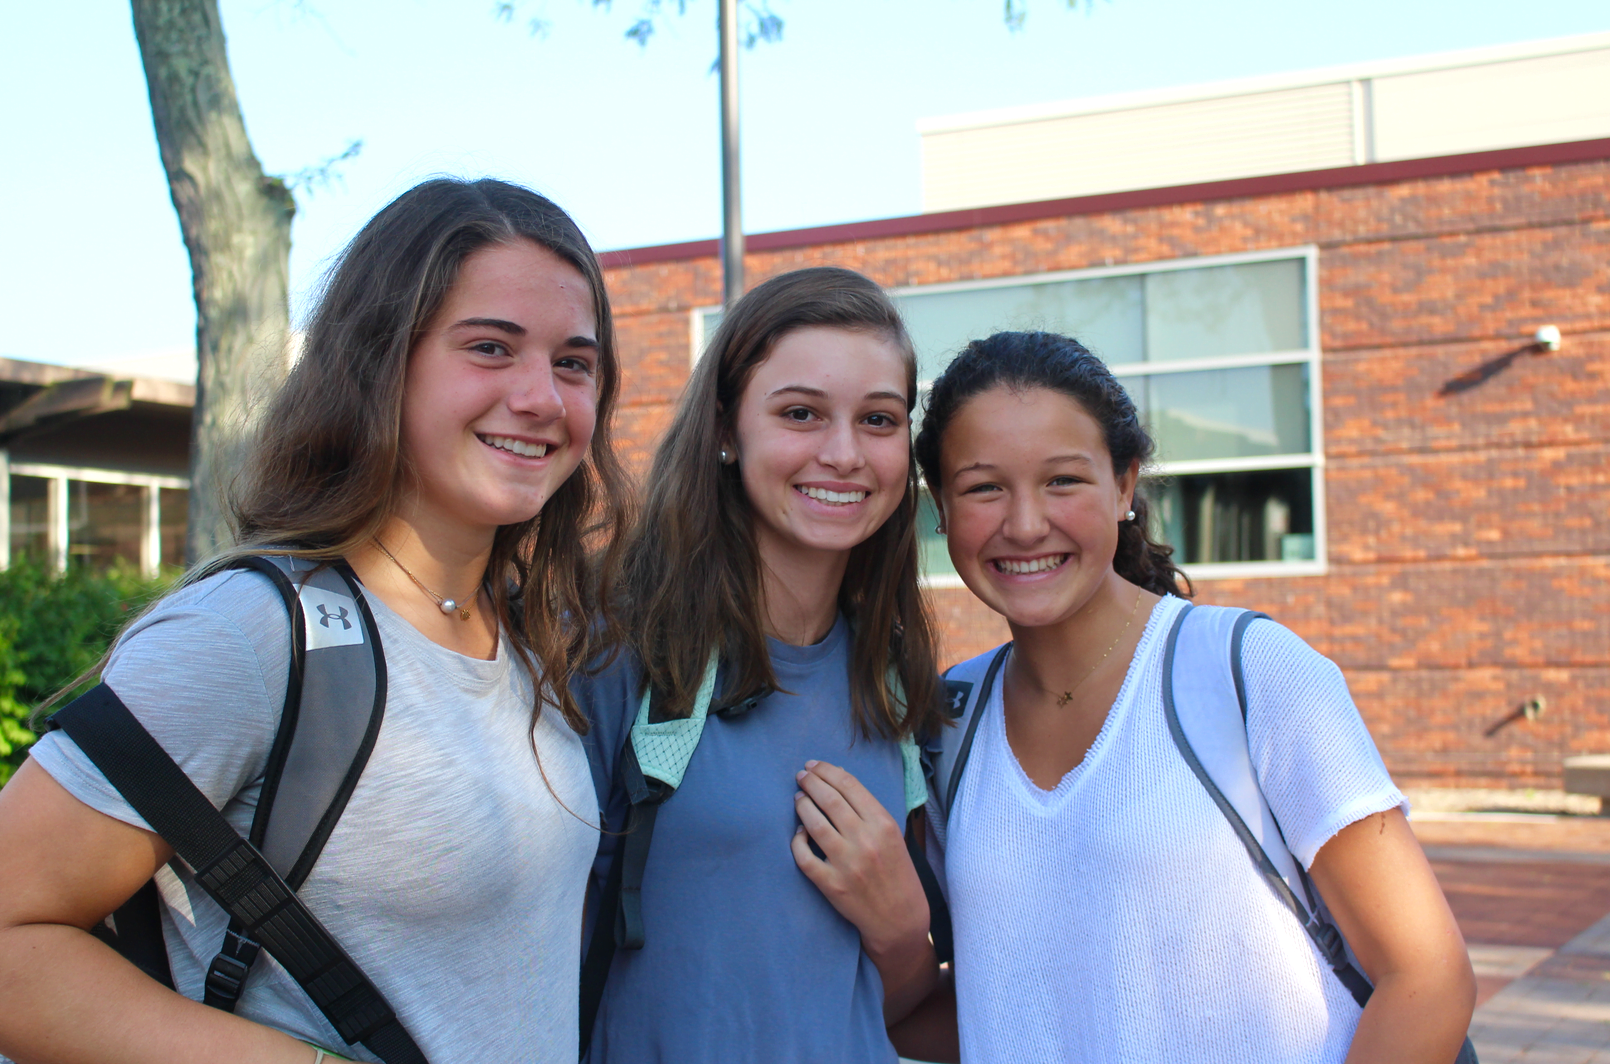 Jessica Ware, Sydney Nethercott and Emma Wingrove arrive for the first day of School at Greenwich High School. Aug 31, 2017 Photo: Leslie Yager